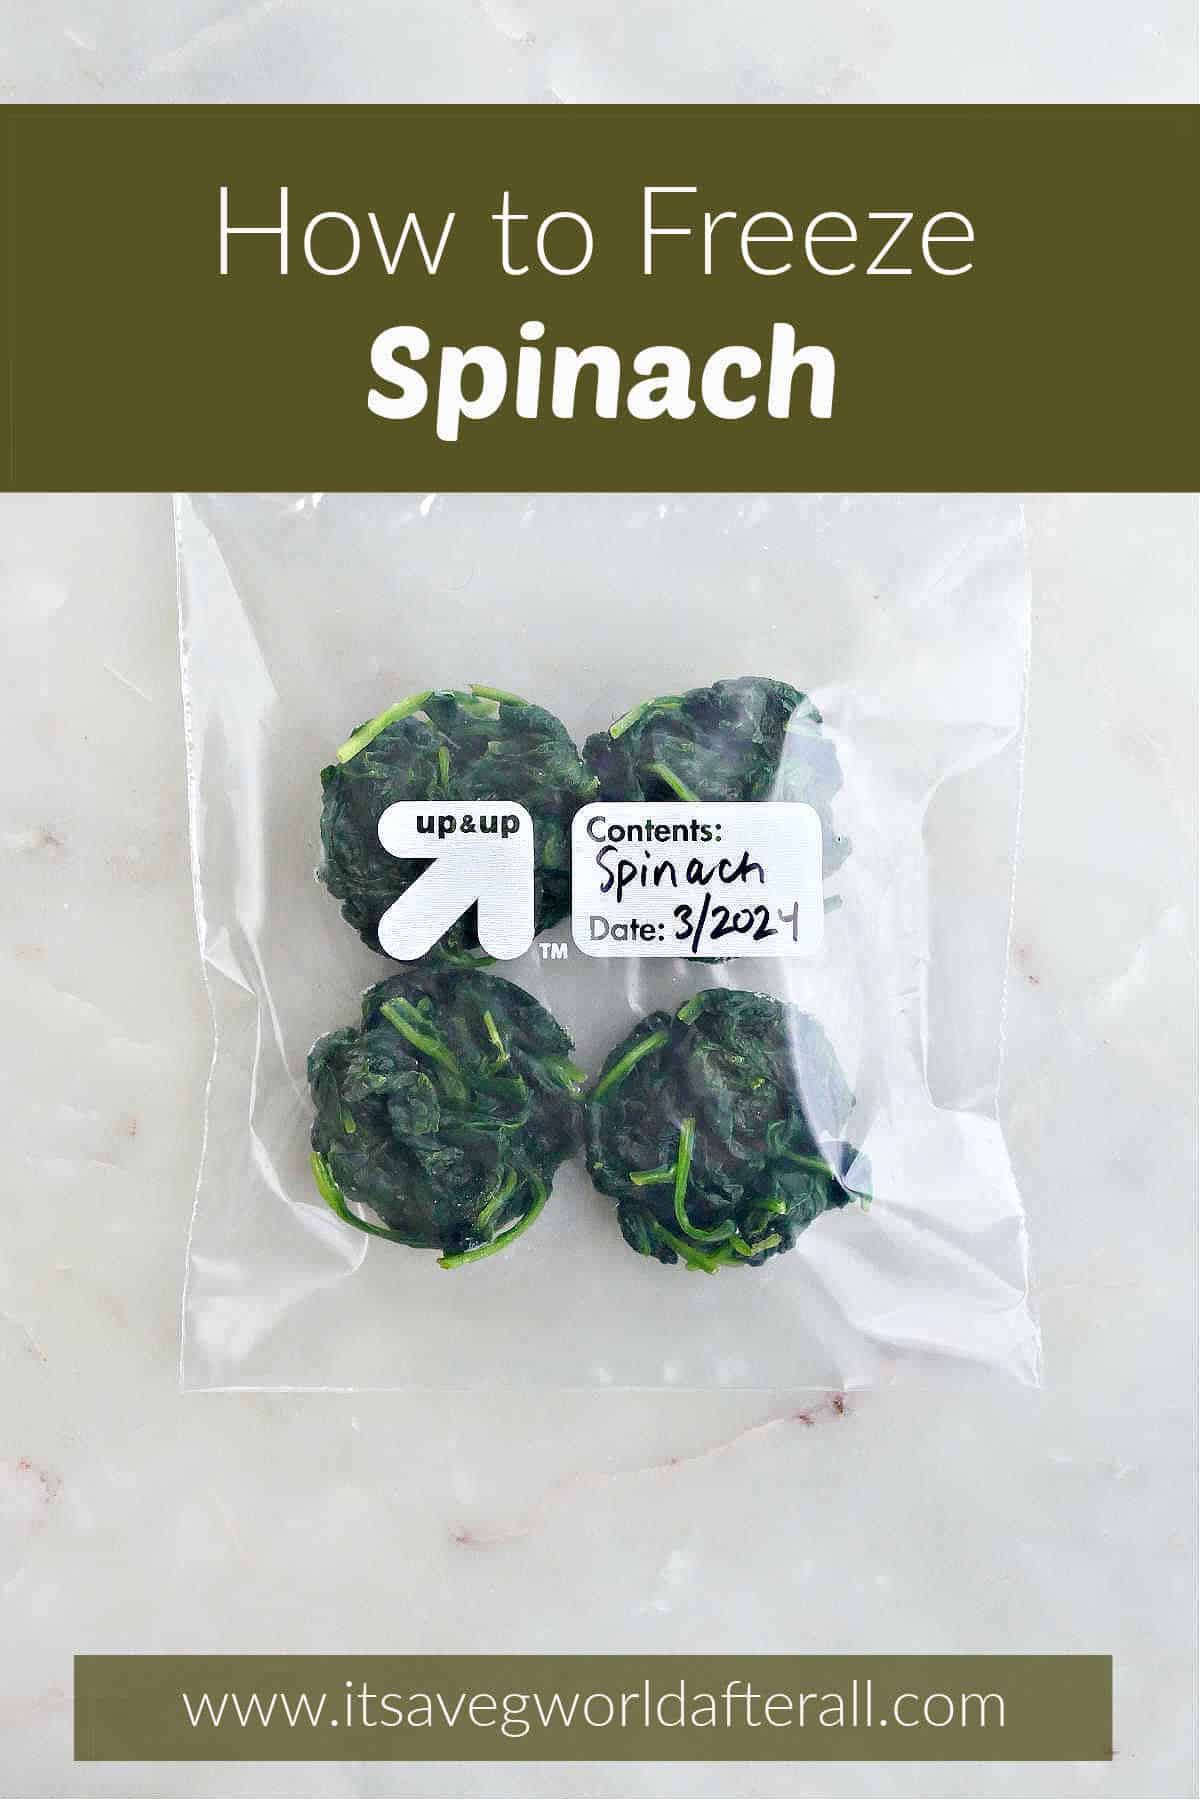 Frozen spinach portions in a Ziplock bag that is labeled.